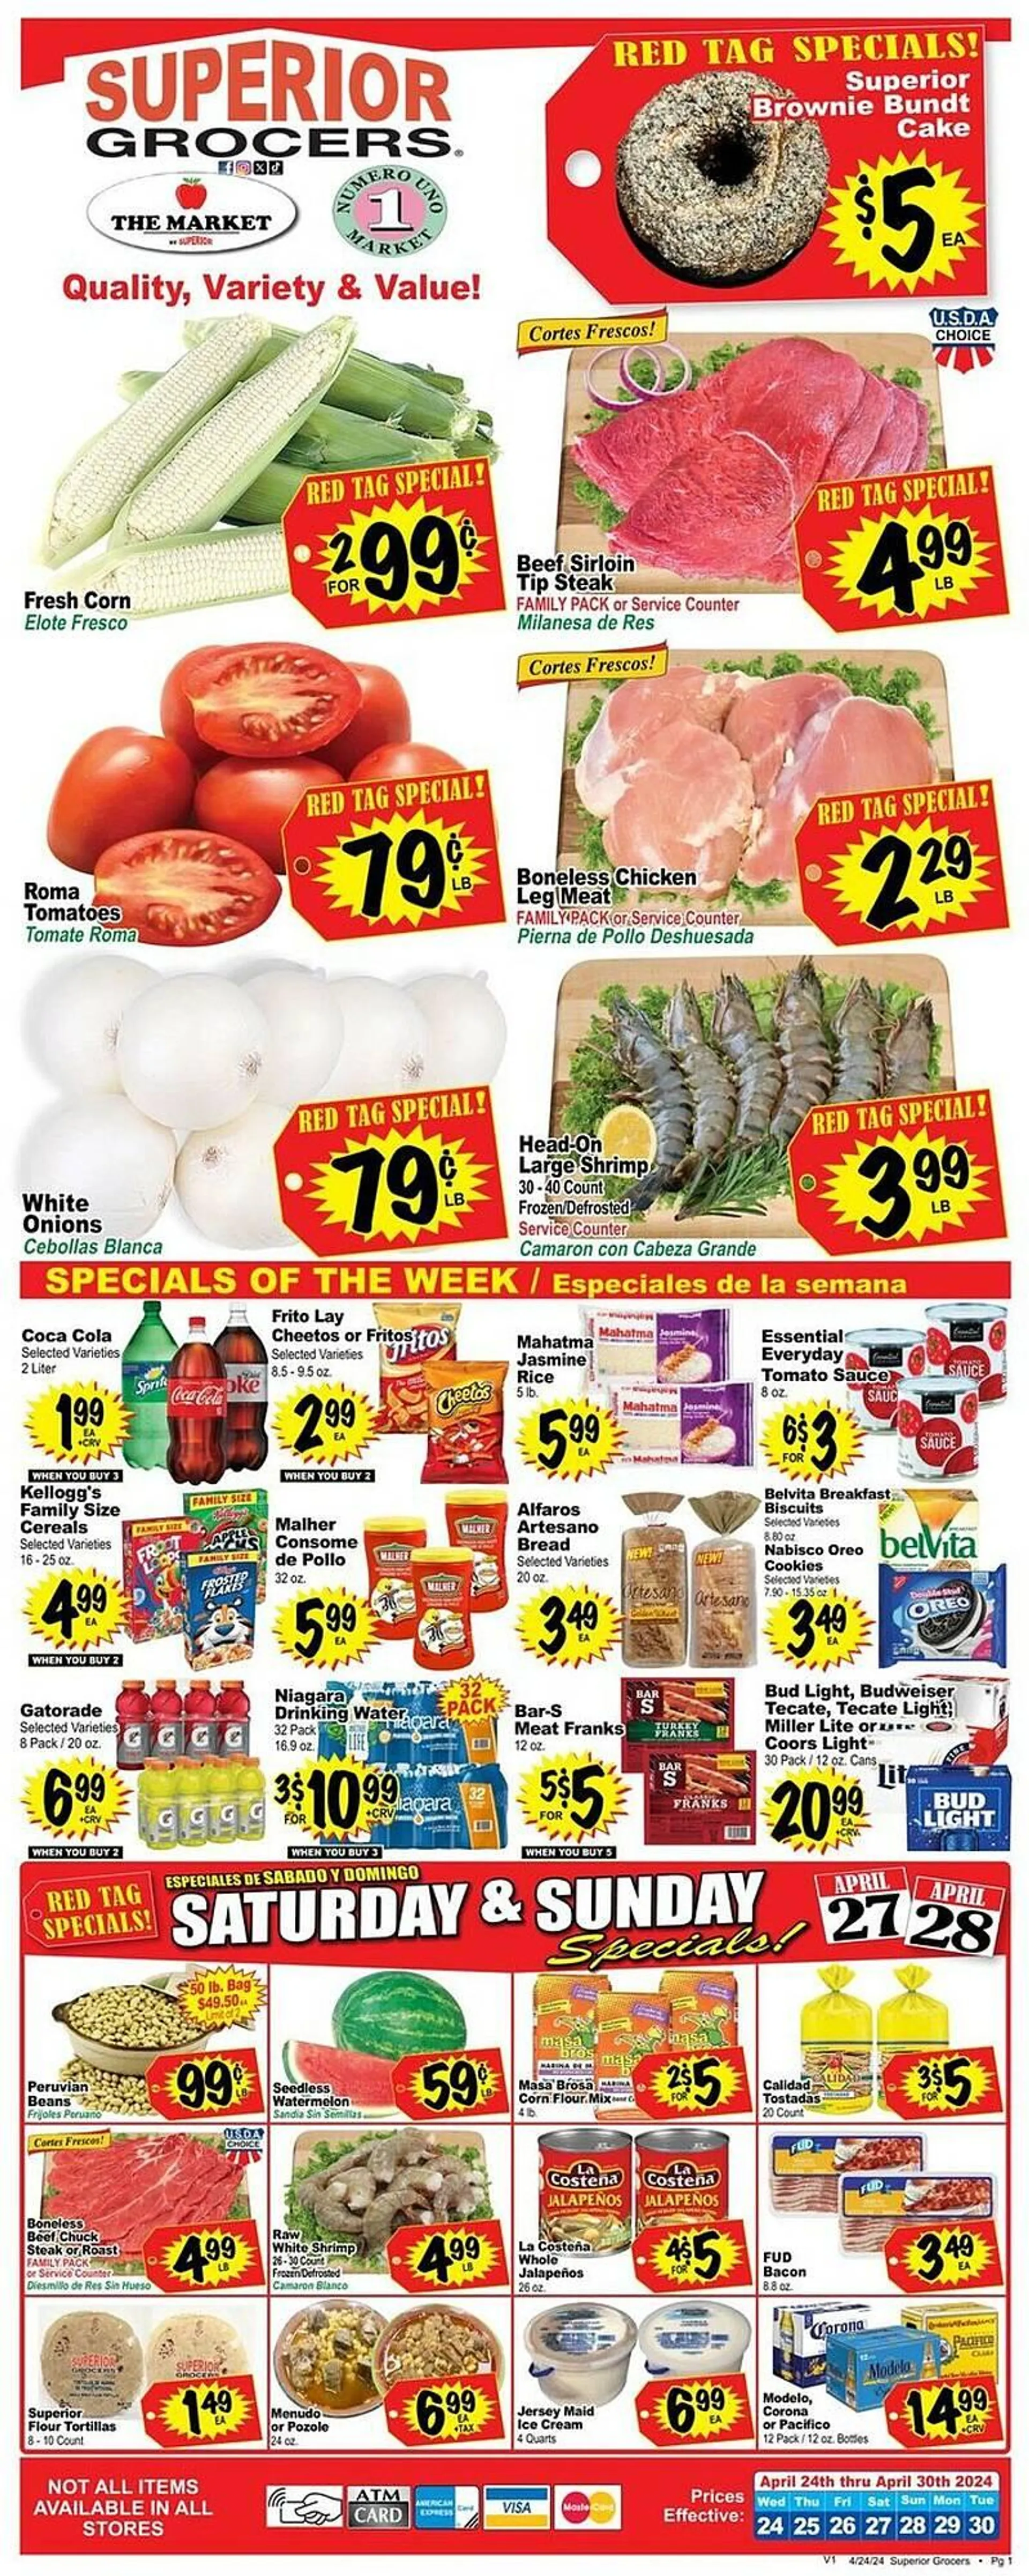 Superior Grocers Weekly Ad - 1